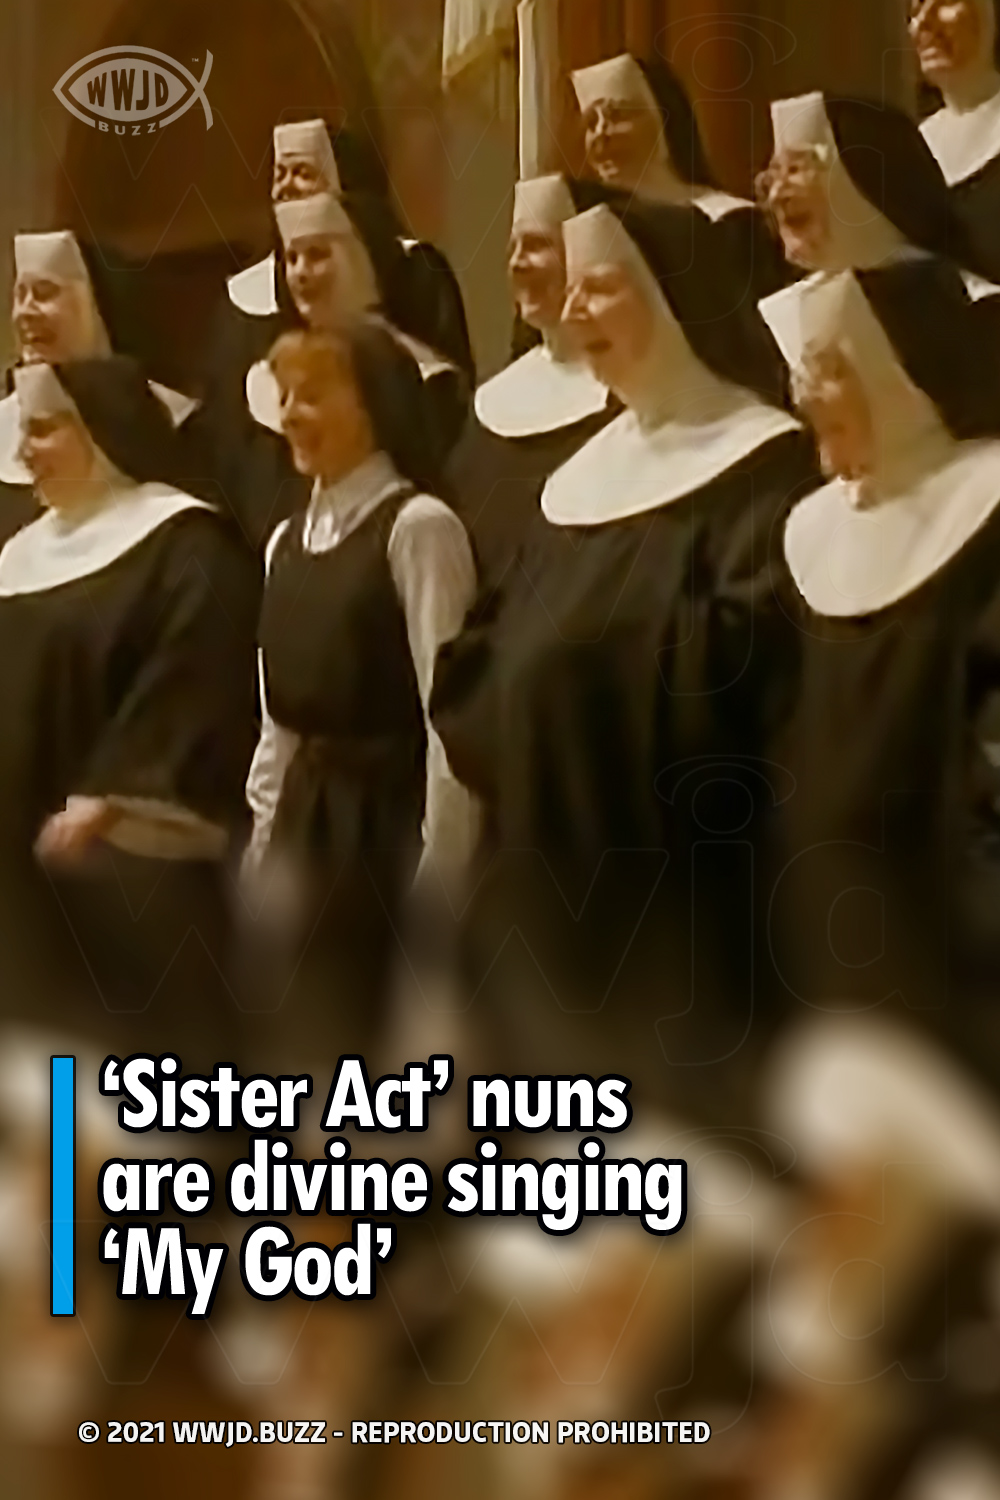 ‘Sister Act’ nuns are divine singing ‘My God’